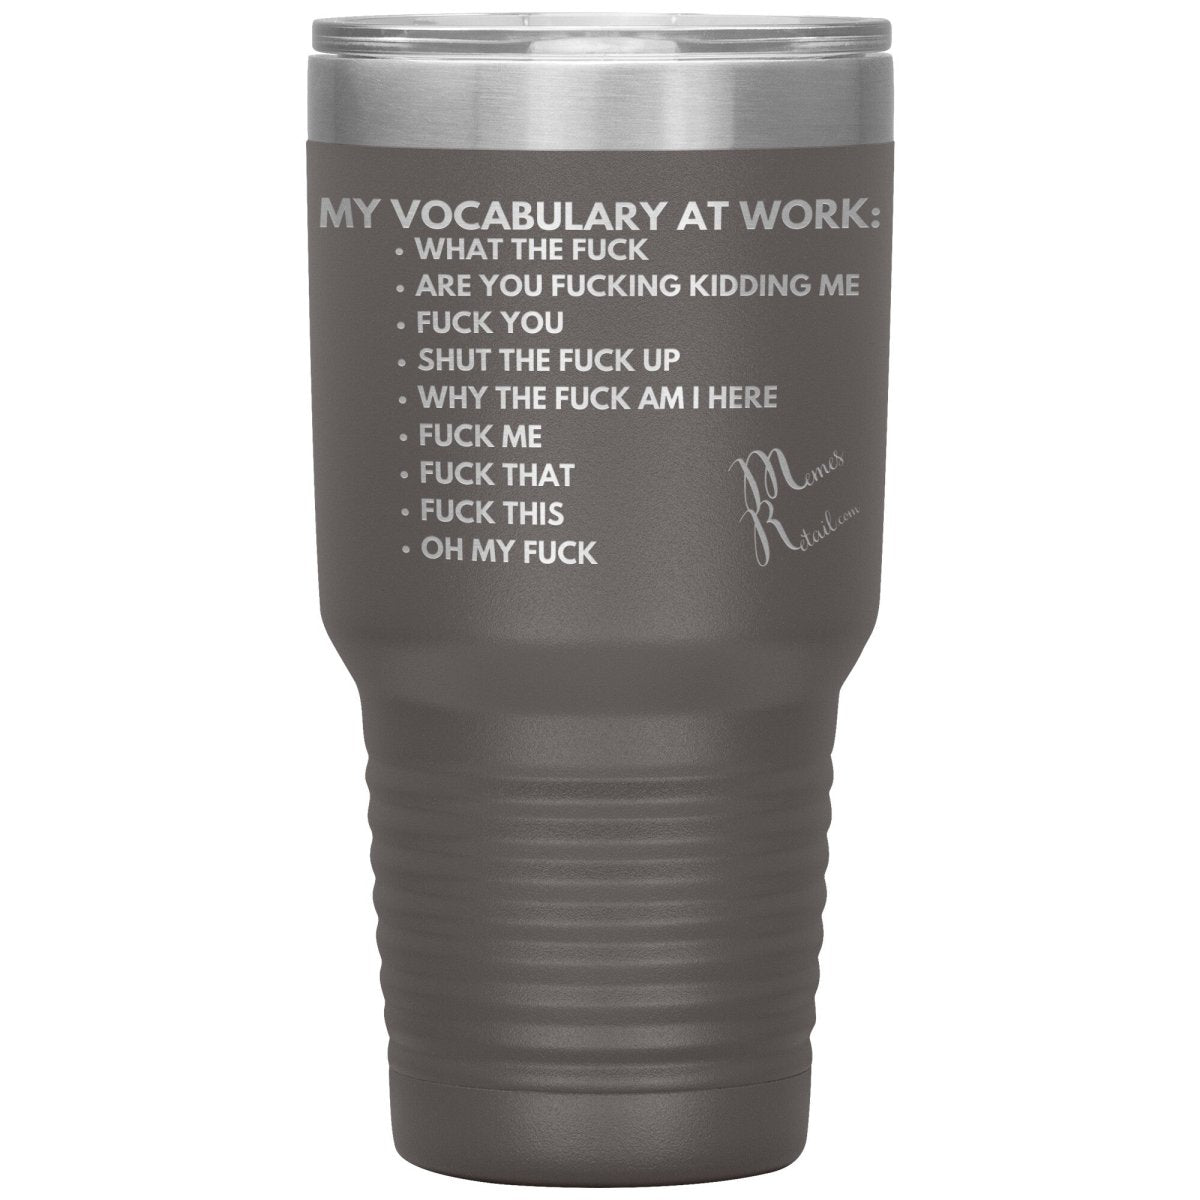 My Vocabulary at Work... Tumblers, 30oz Insulated Tumbler / Pewter - MemesRetail.com